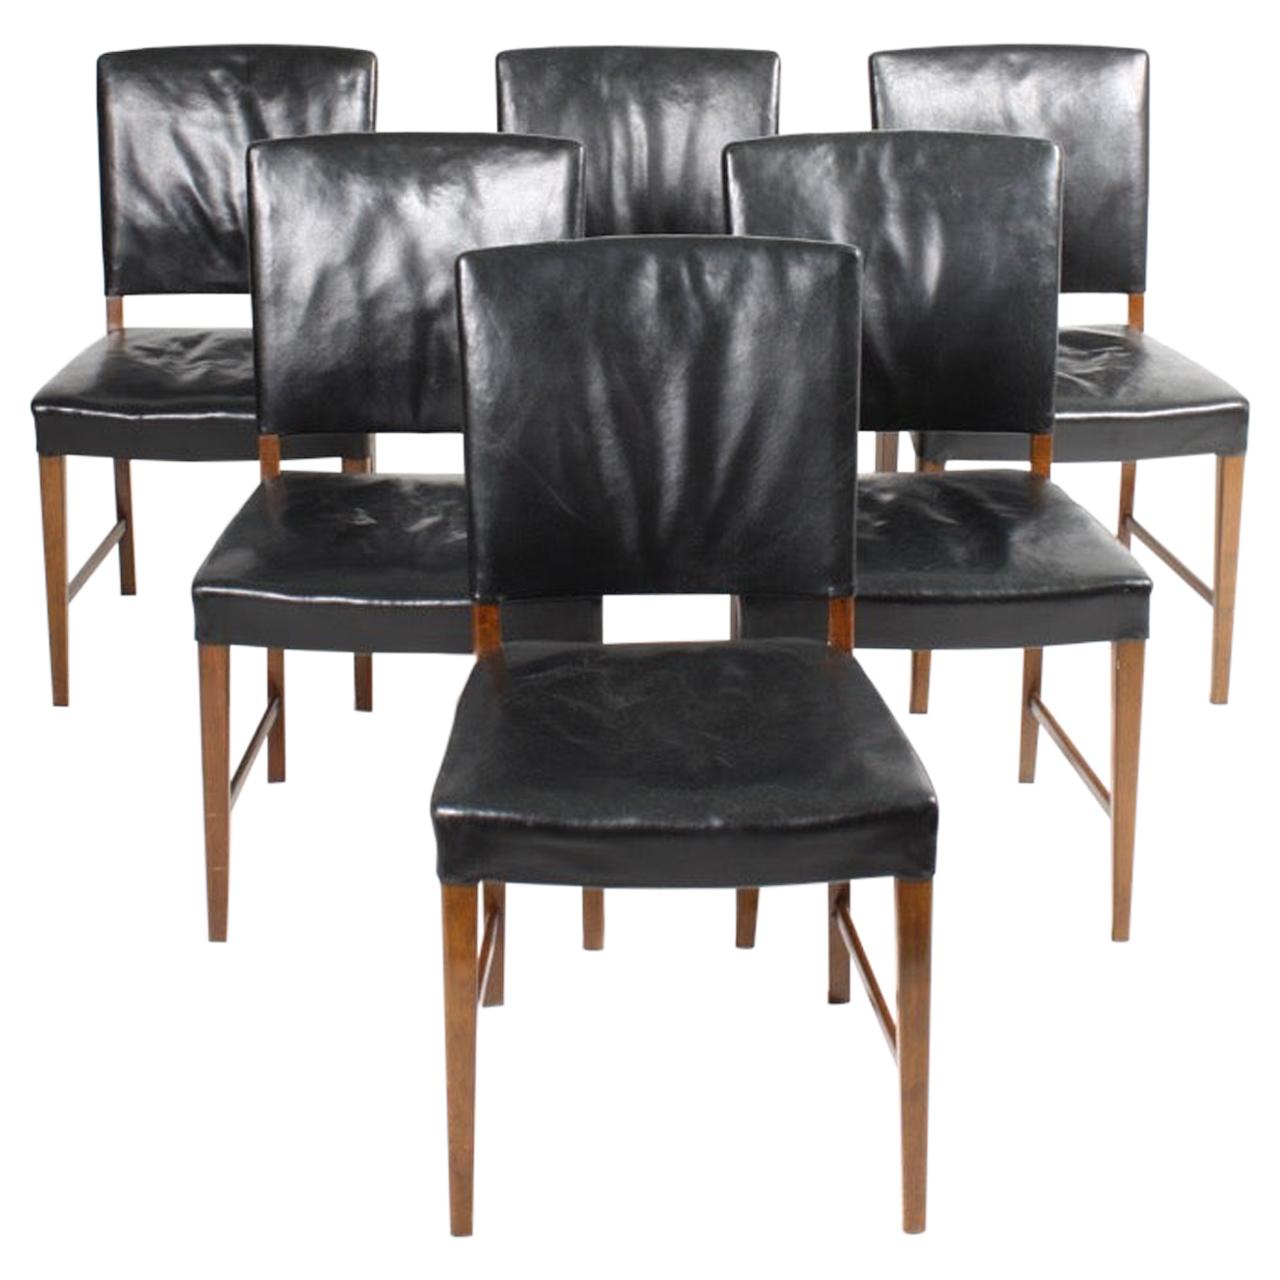 Set of Six Midcentury Side Chairs in Patinated Leather, Made in Denmark